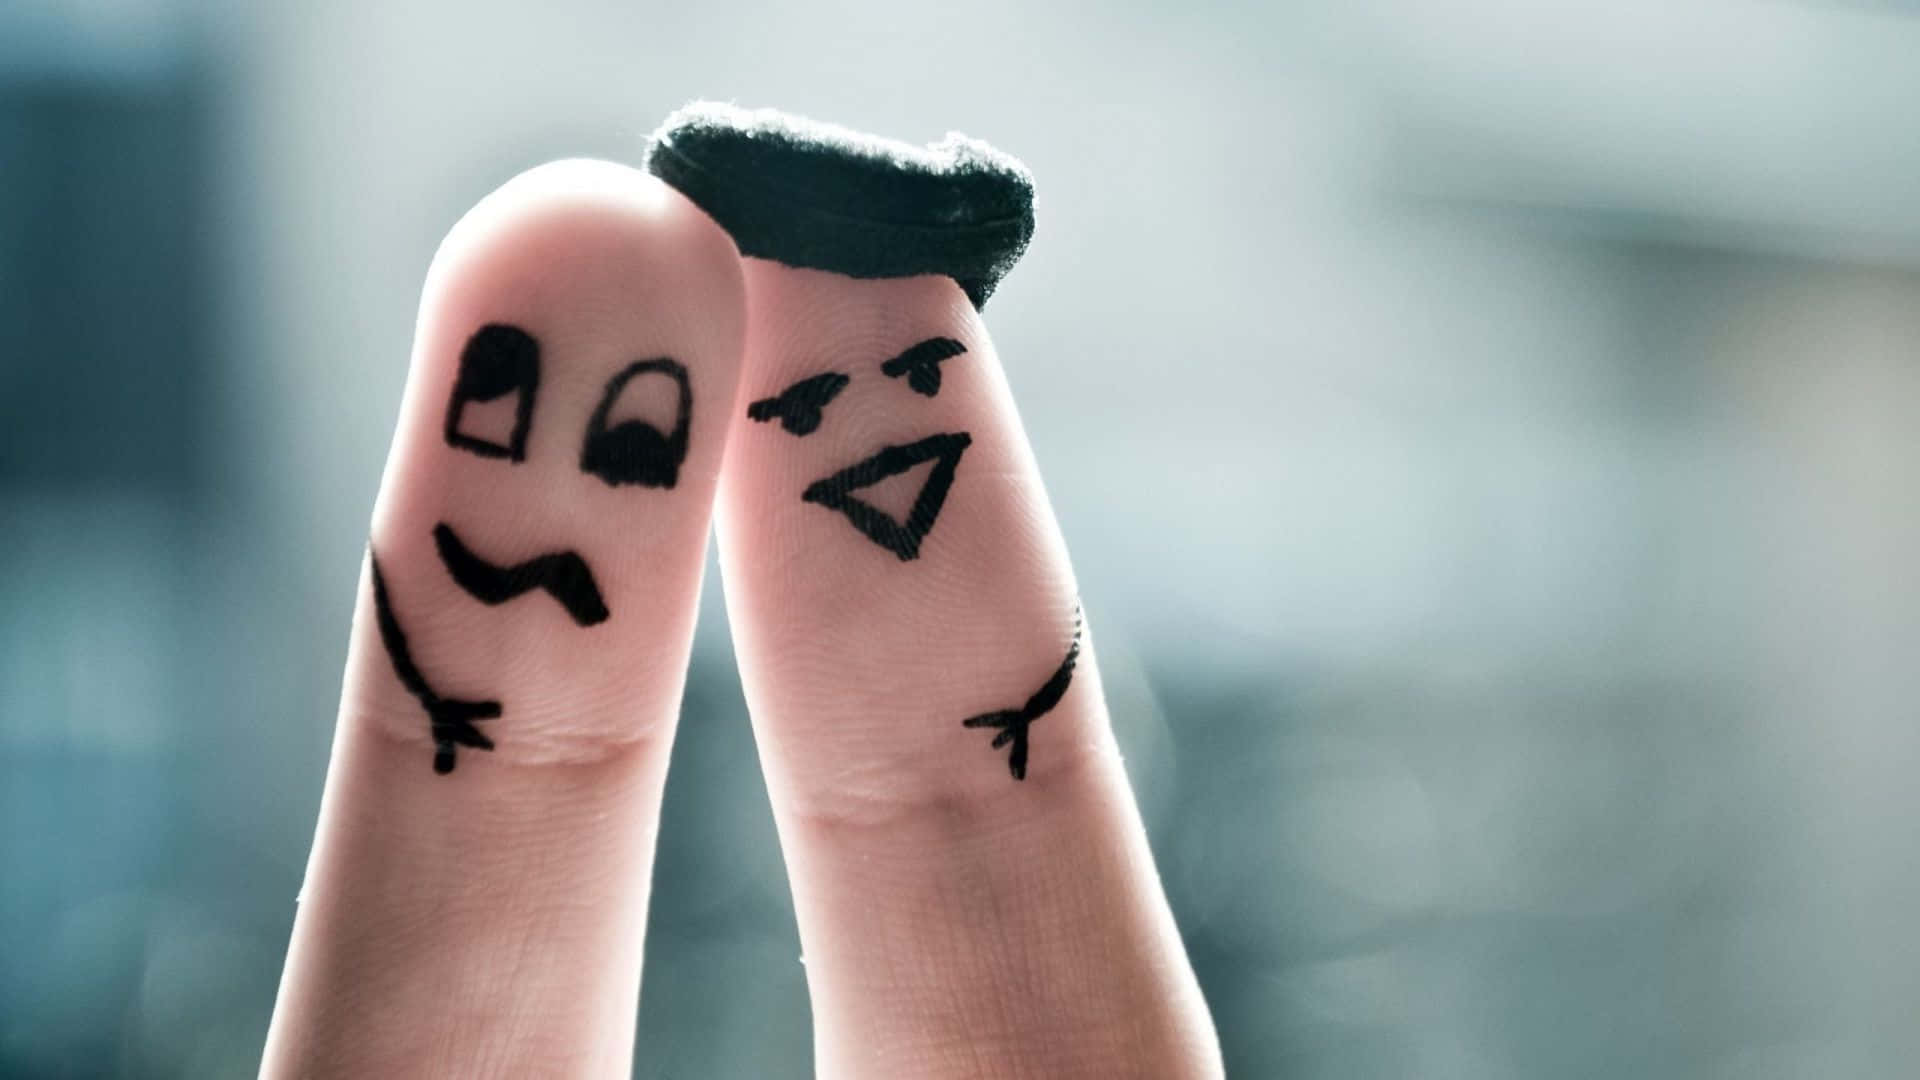 Two People Holding Their Fingers Up With Faces Drawn On Them